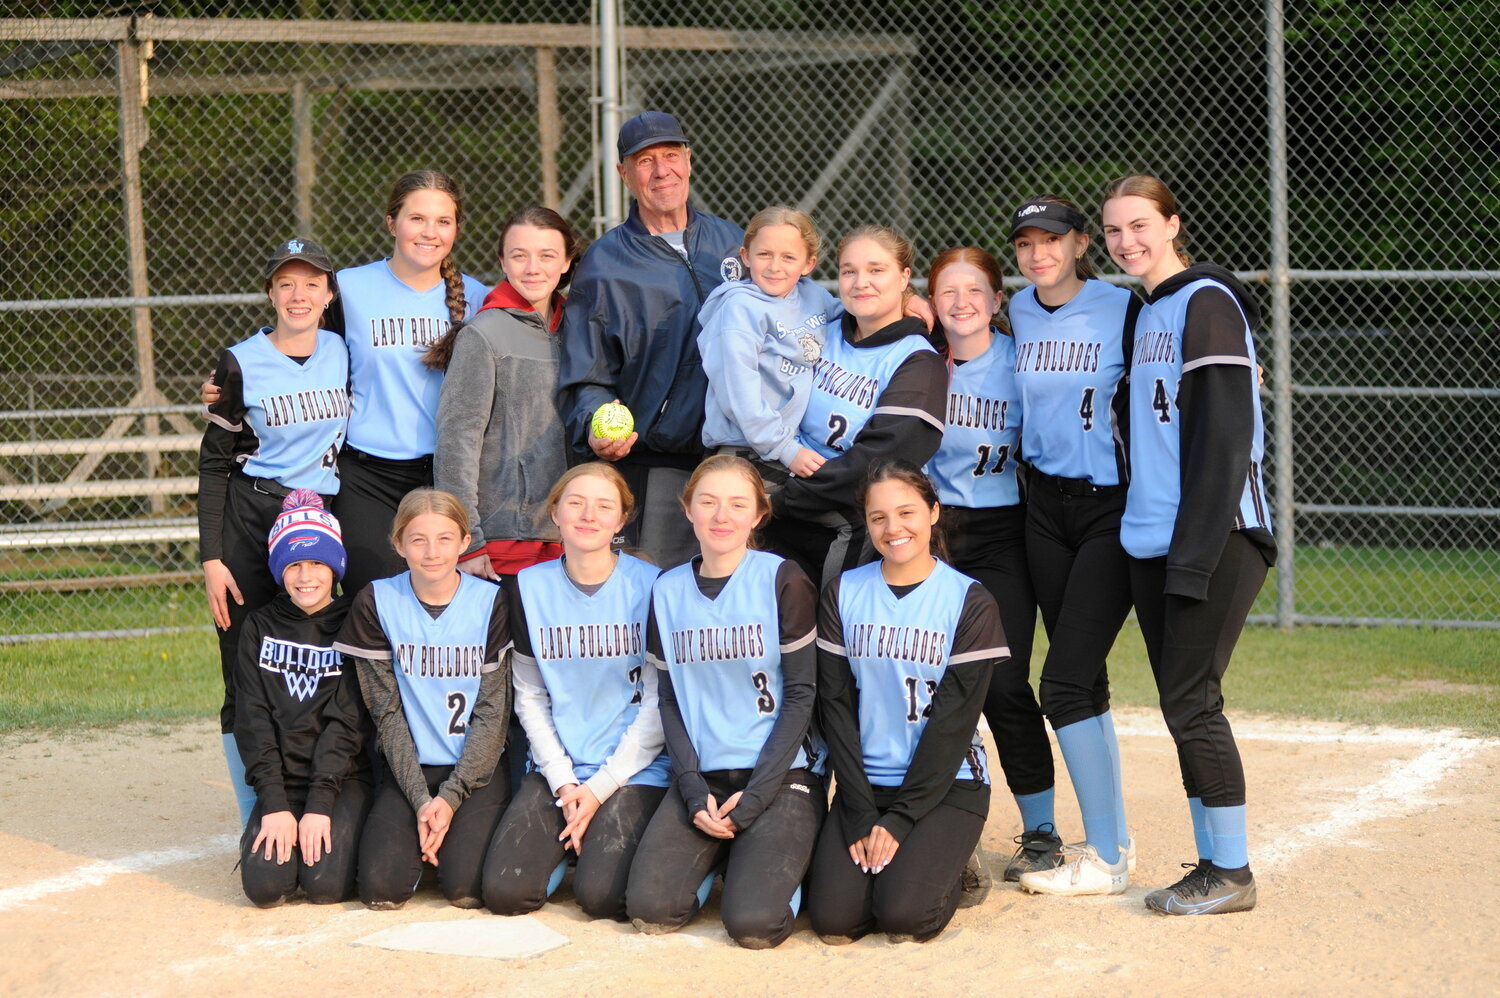 On May 17, after the second out in the final frame of Sullivan West’s game against Port Jervis, the game was halted so the Lady Bulldogs could present retiring NYSSO official Dan Clark with a signed ball. He is pictured with the team. Front row: Allie Hellerer, left; Kierston Knapp; Liz Reeves; Nicole Reeves; and Georgeanne Cardona. Back row: Sam Hellerer, left; Karlee Diehl; Hannah Abplanalp; home plate ump Dan Clark; Kenzie Knapp; Lucy Arzill; Cheyenne Decker; Kaitlyn Drobysh; and Paige Muzuruk...